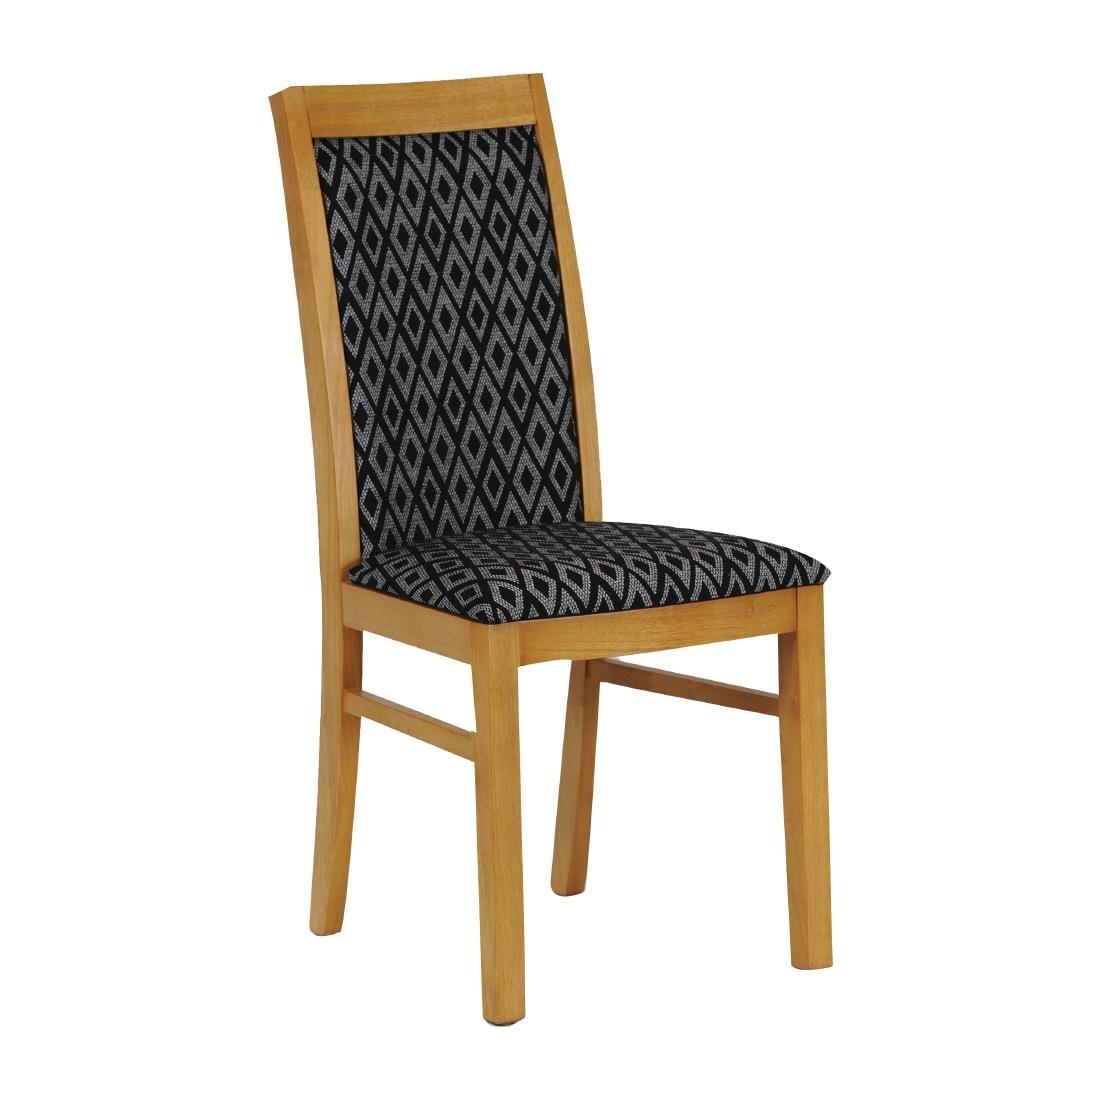 Brooklyn Padded Back Soft Oak Dining Chair with Blue Diamond Padded Seat and Back (Pack of 2) - FT418  - 1